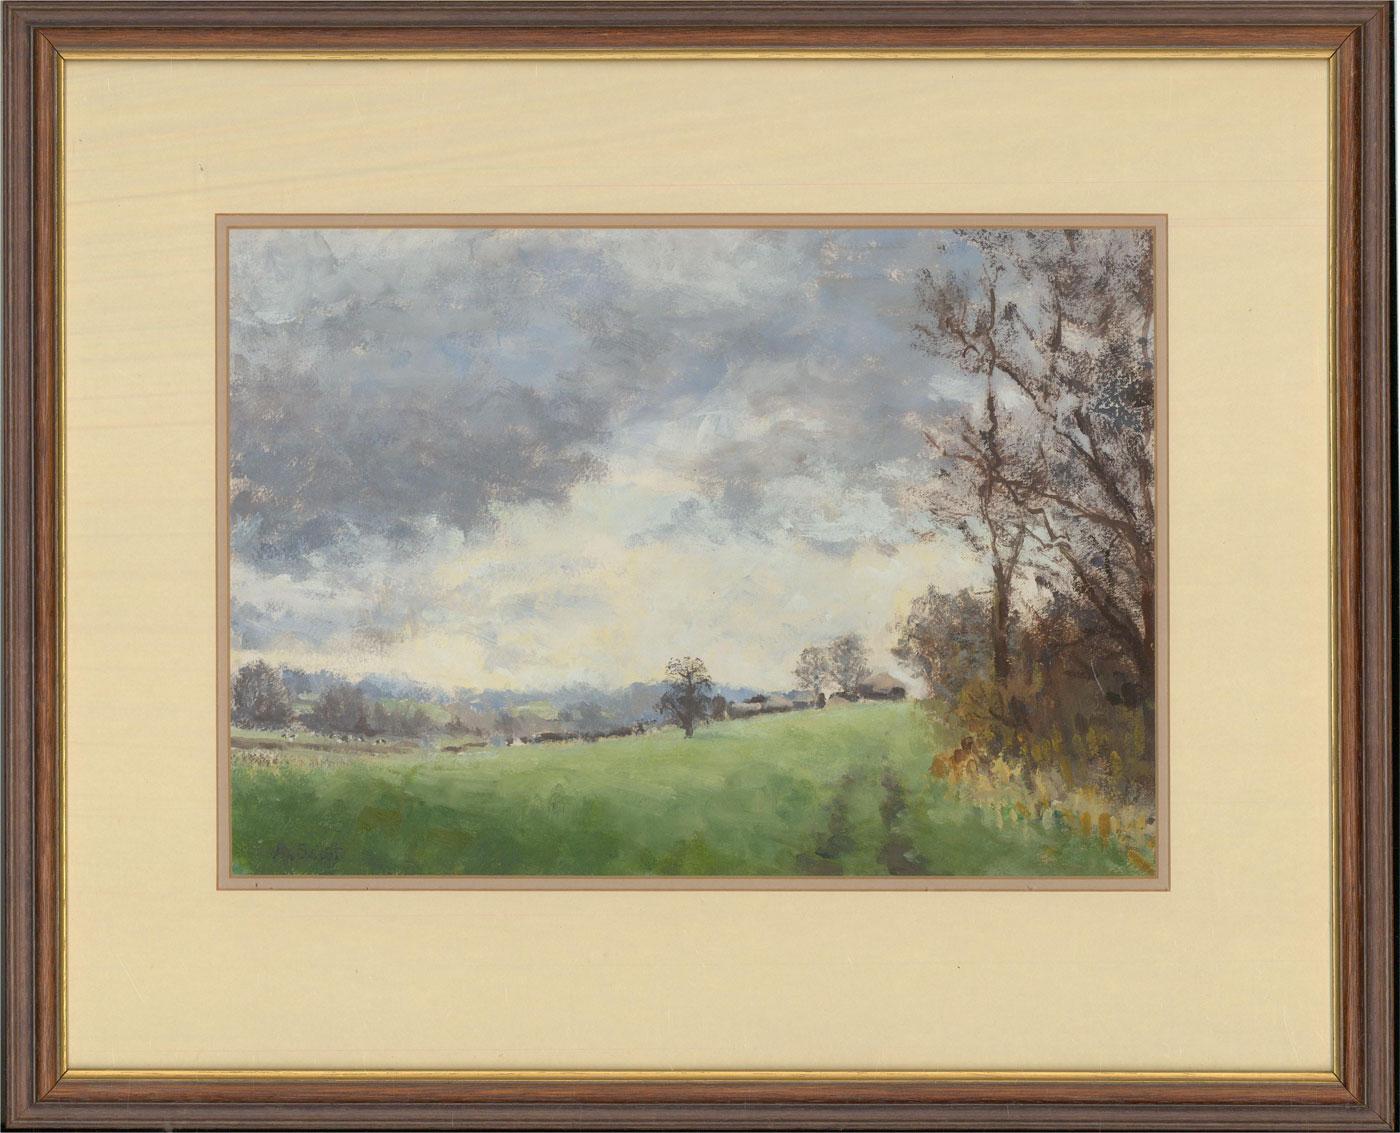 An attractive oil painting by Anne Scott, depicting a rural scene in Devizes, Wiltshire. Signed to the lower left-hand corner. There is a label on the reverse inscribed with the artist's name and location. Presented in a double card mount and in a